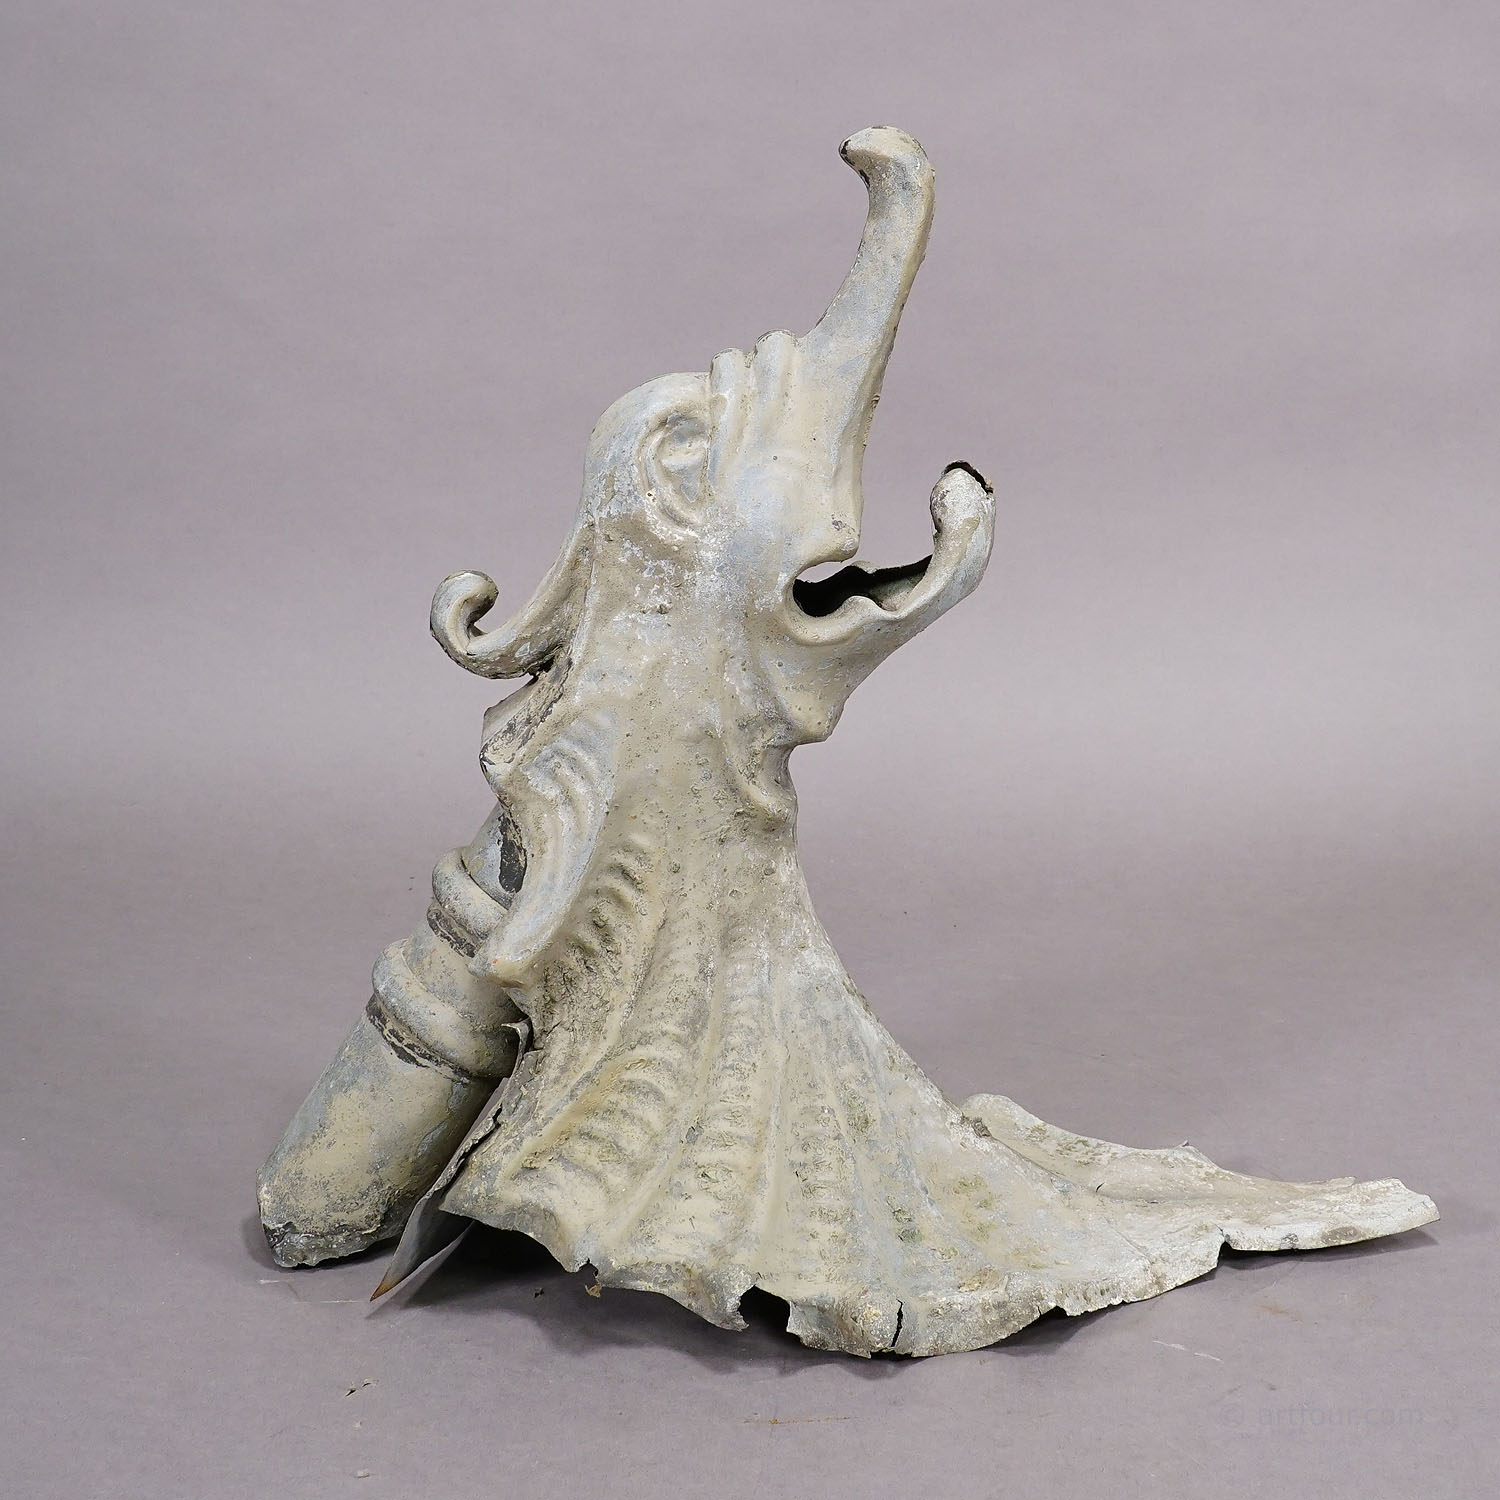 Antique Gargoyle Water Spout from a Rain Pipe, Germany 19th Century